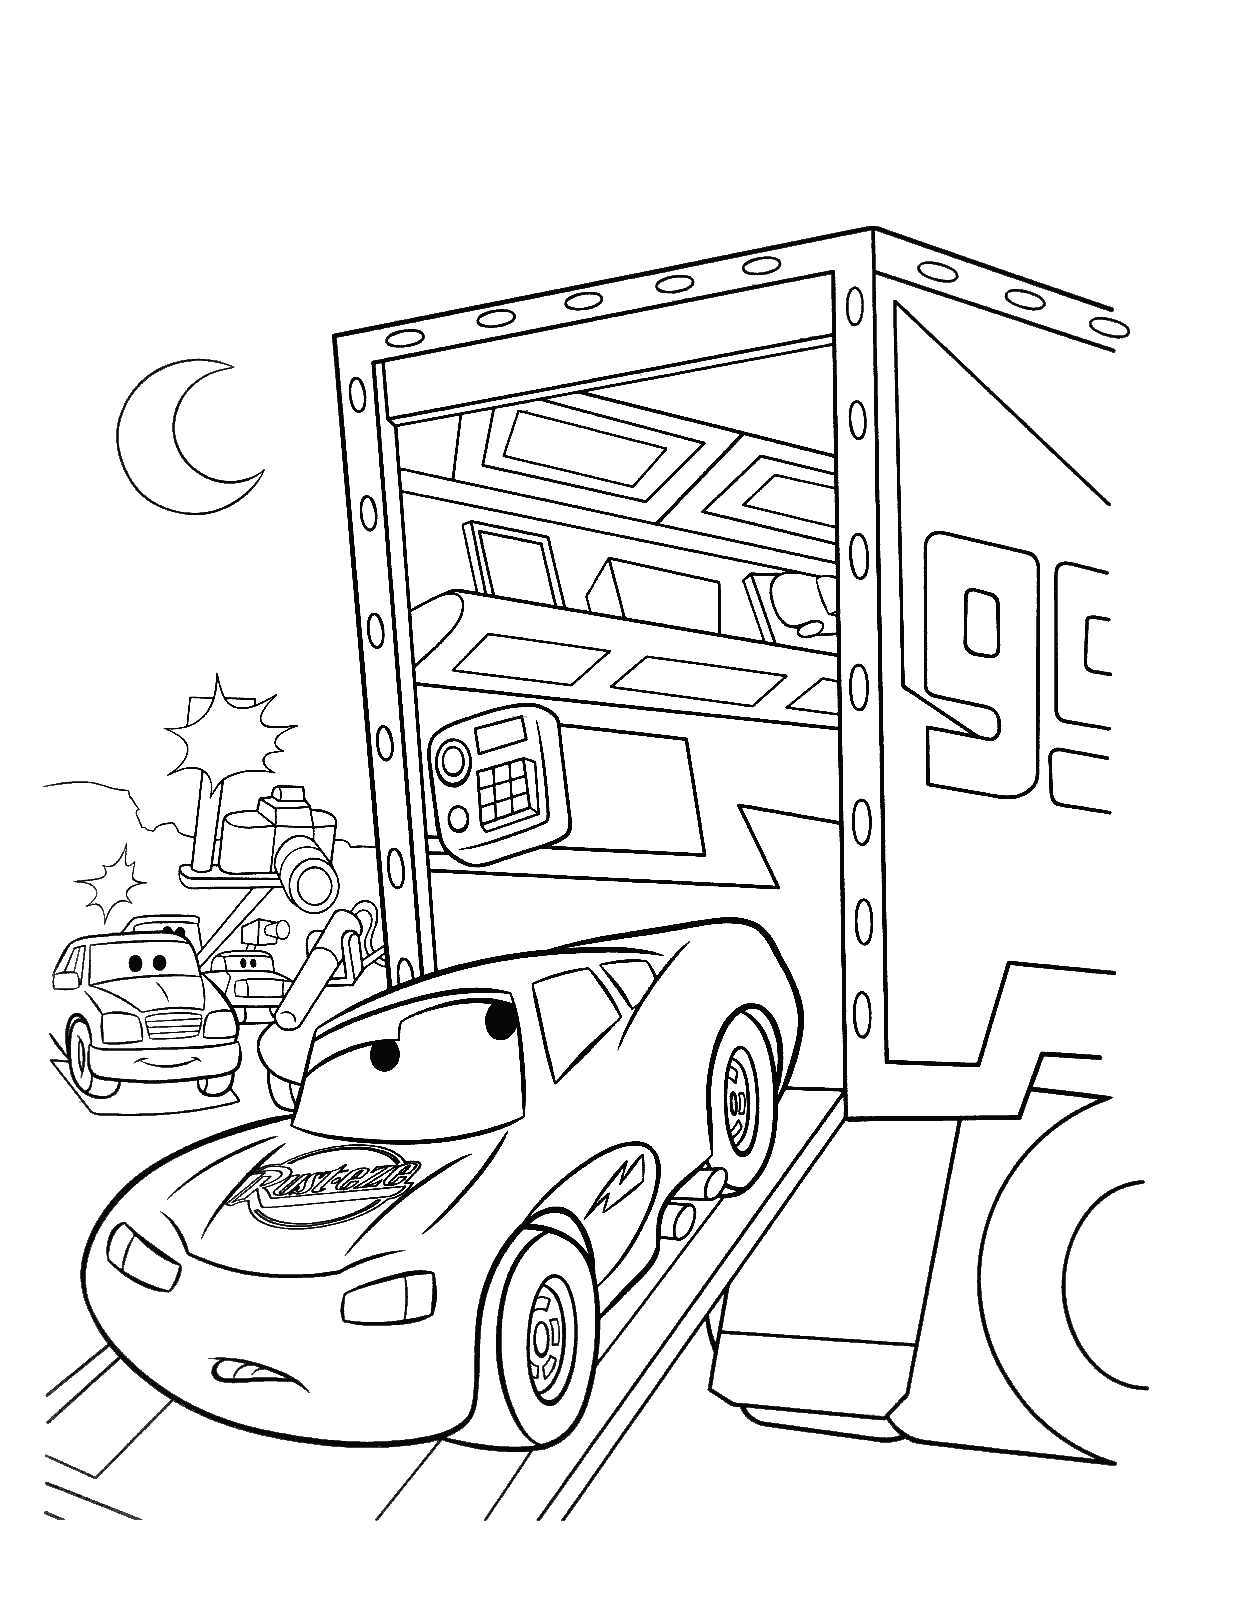 Car Coloring Page Easy - 68+ SVG File for DIY Machine